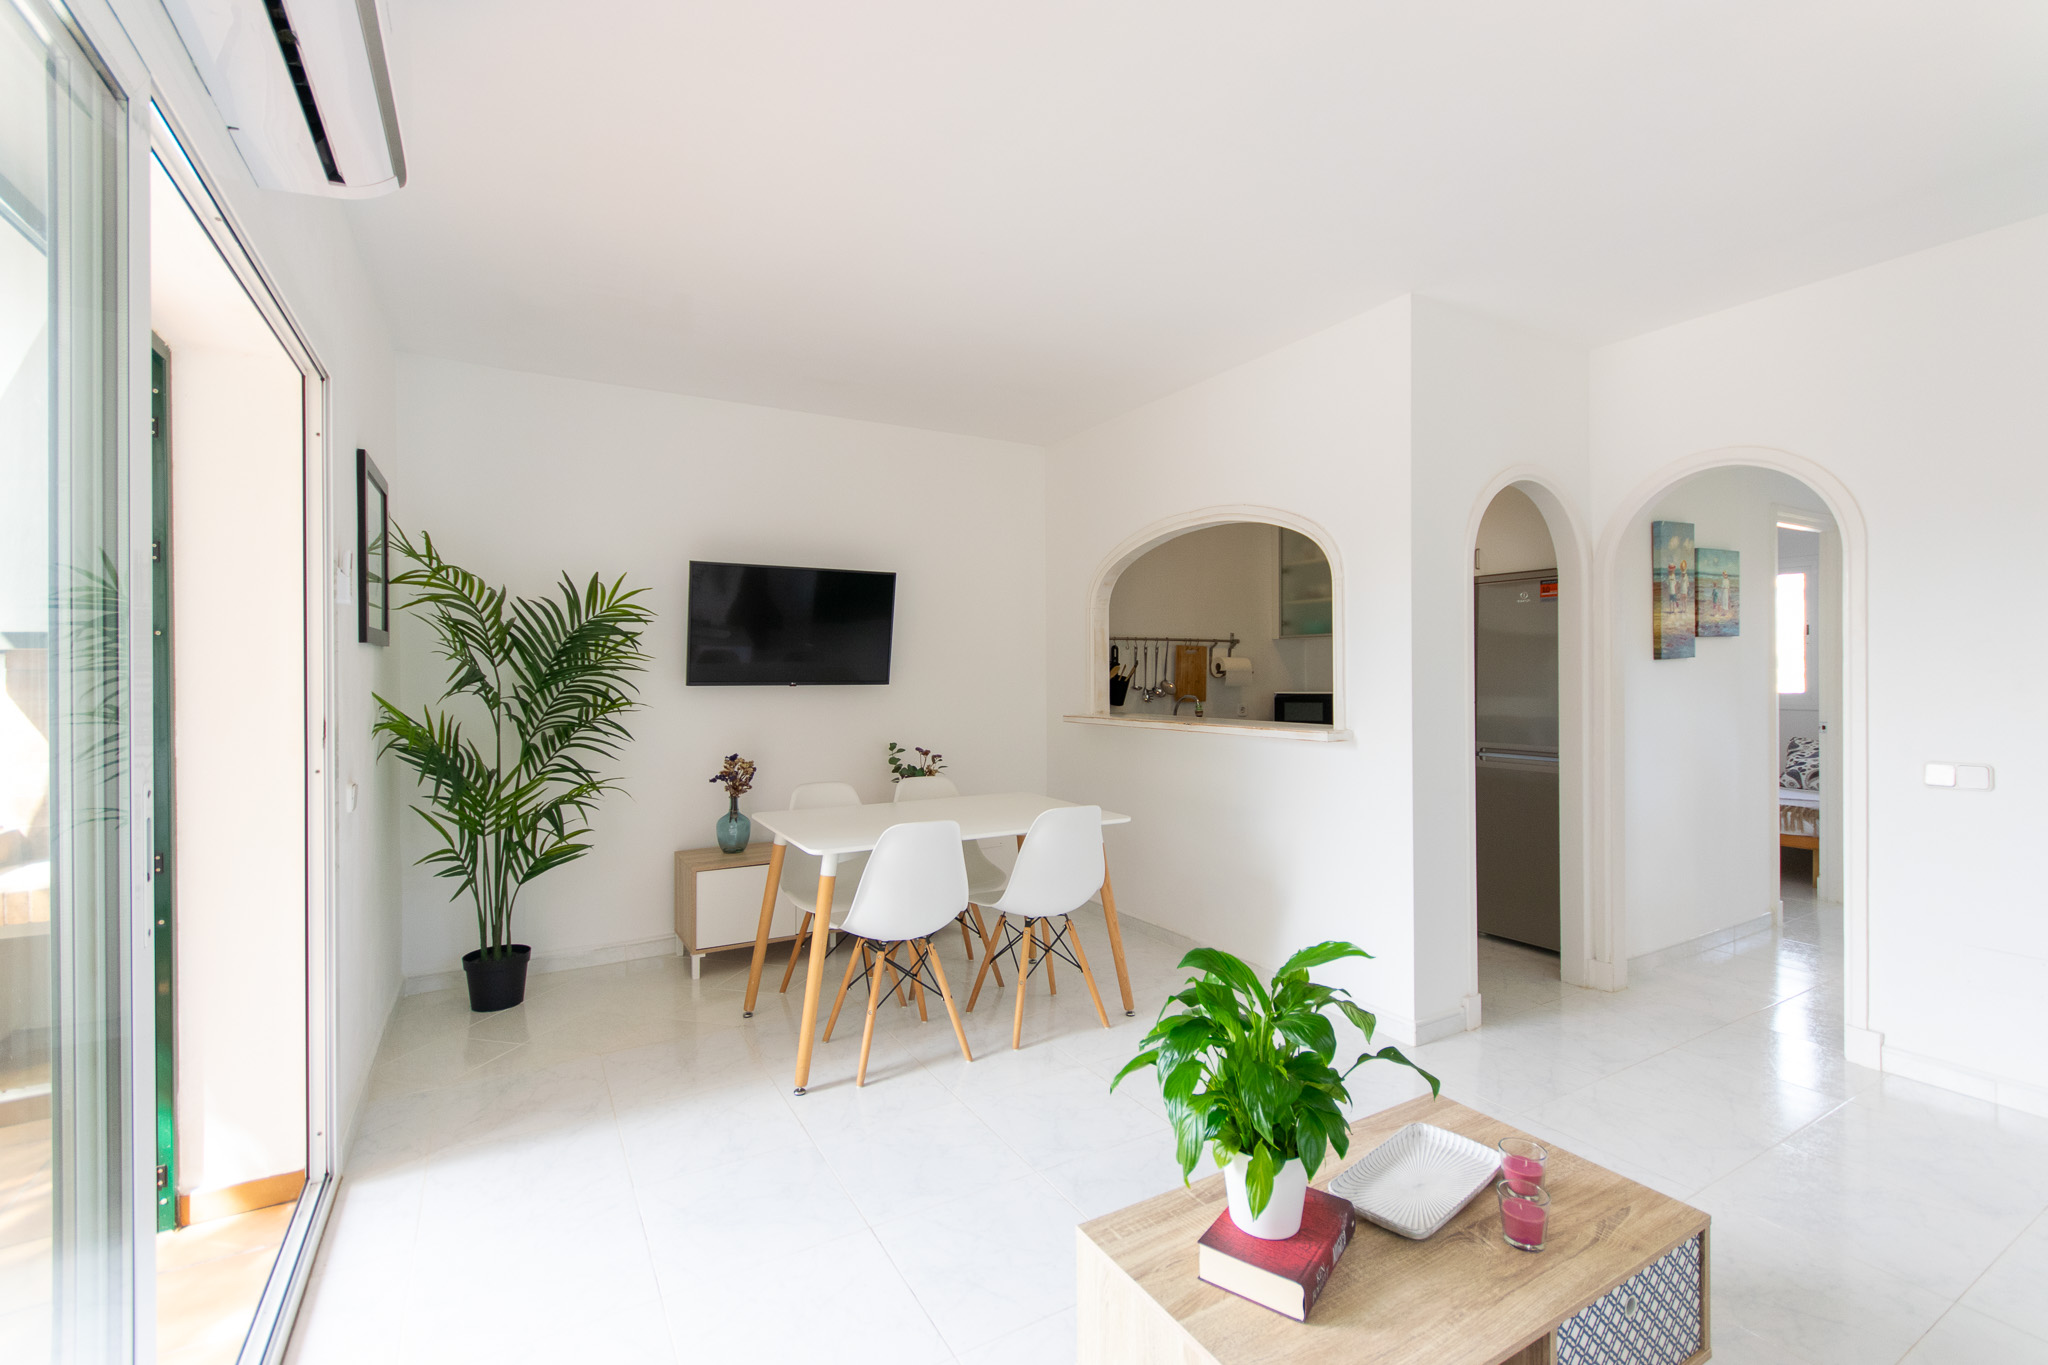 Living-dining room of a beautiful renovated flat in Son Parc